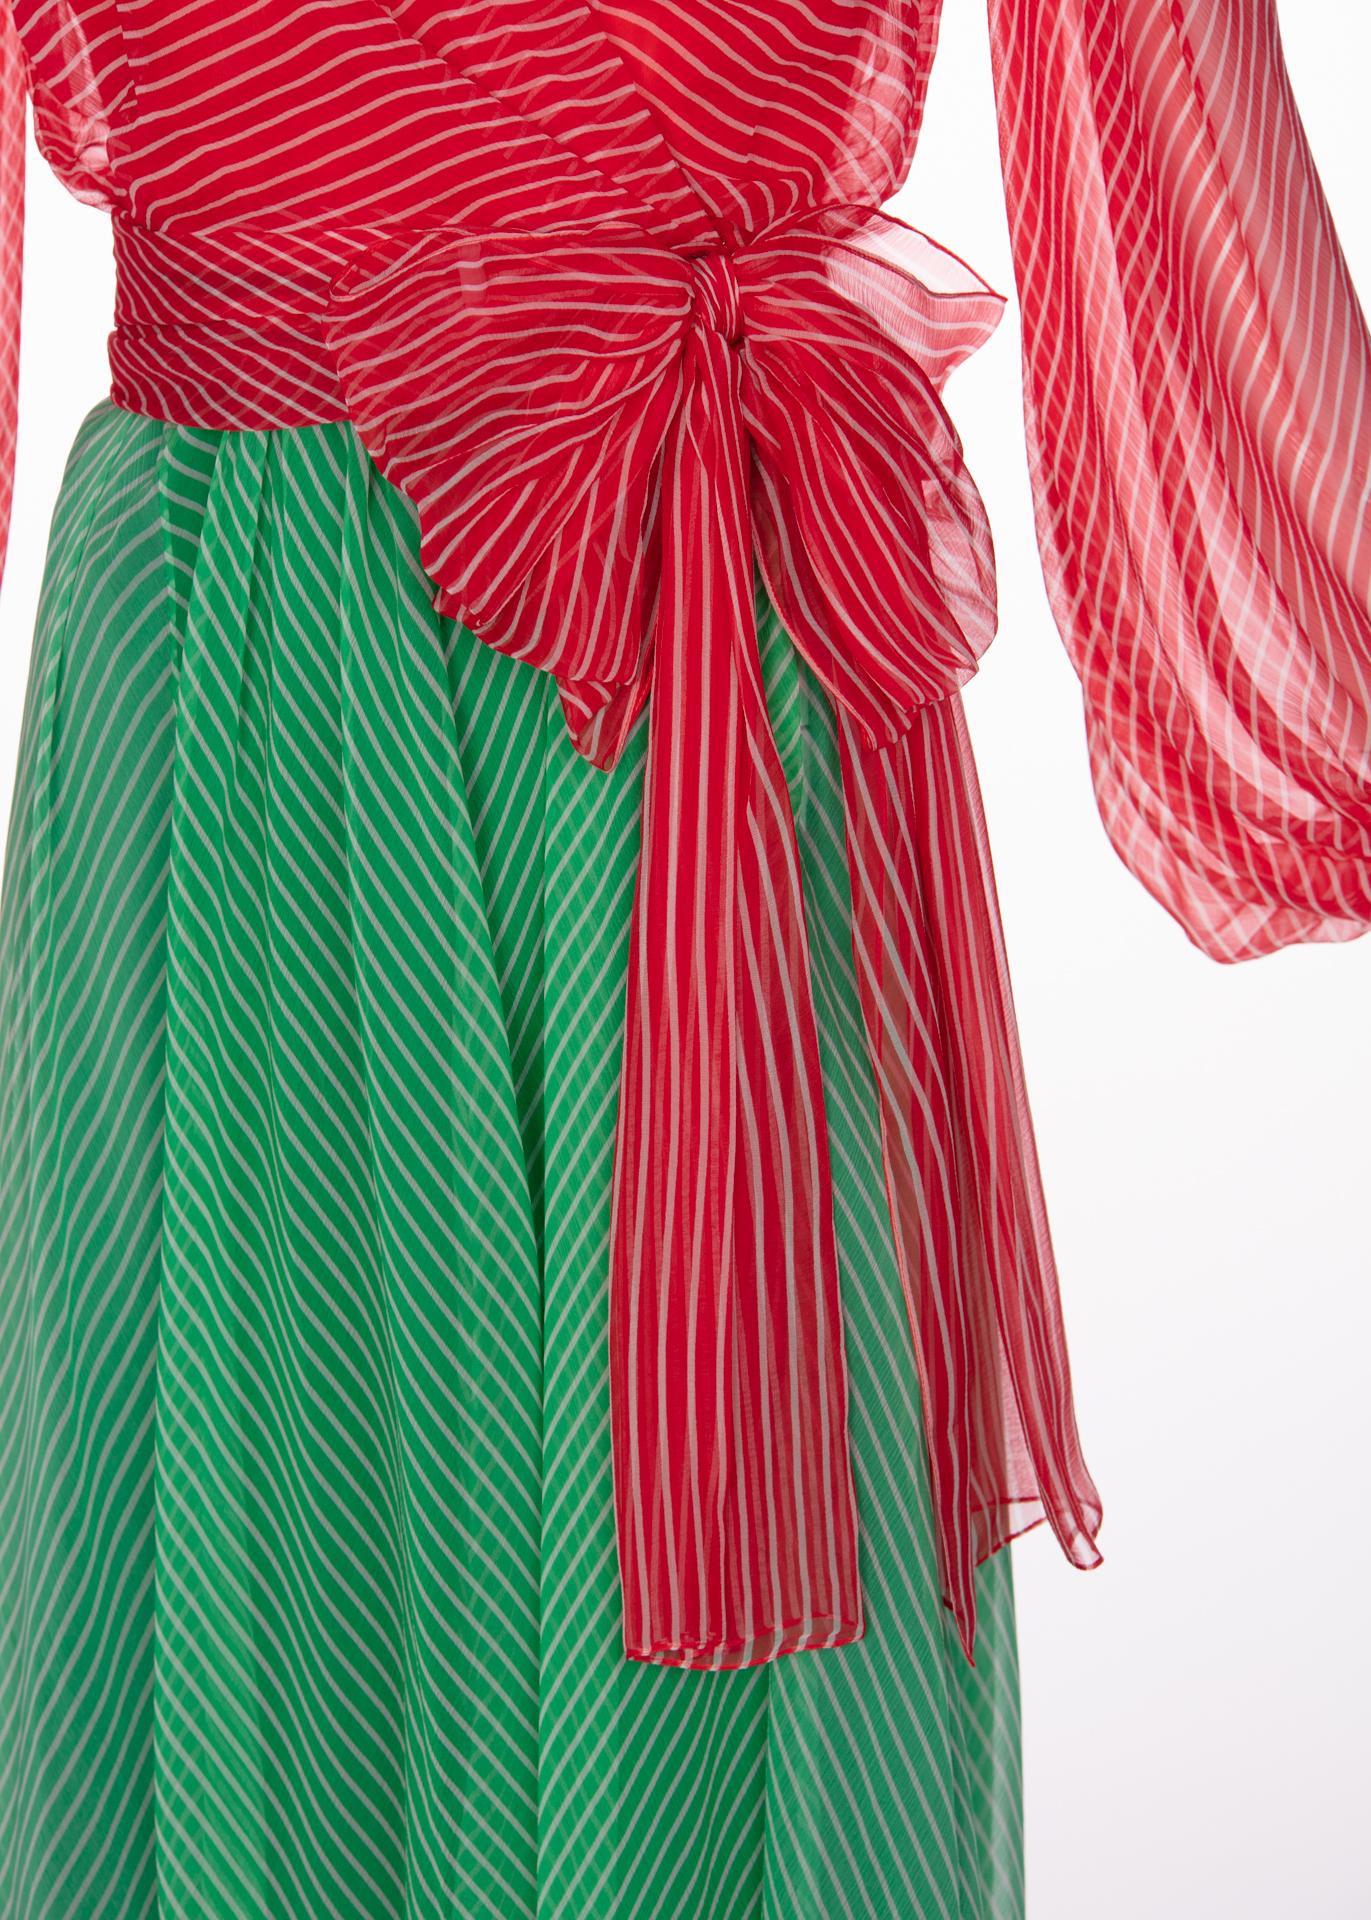 Yves Saint Laurent YSL Haute Couture Red / Green Stripe Silk Chiffon Dress, 1991 For Sale 1